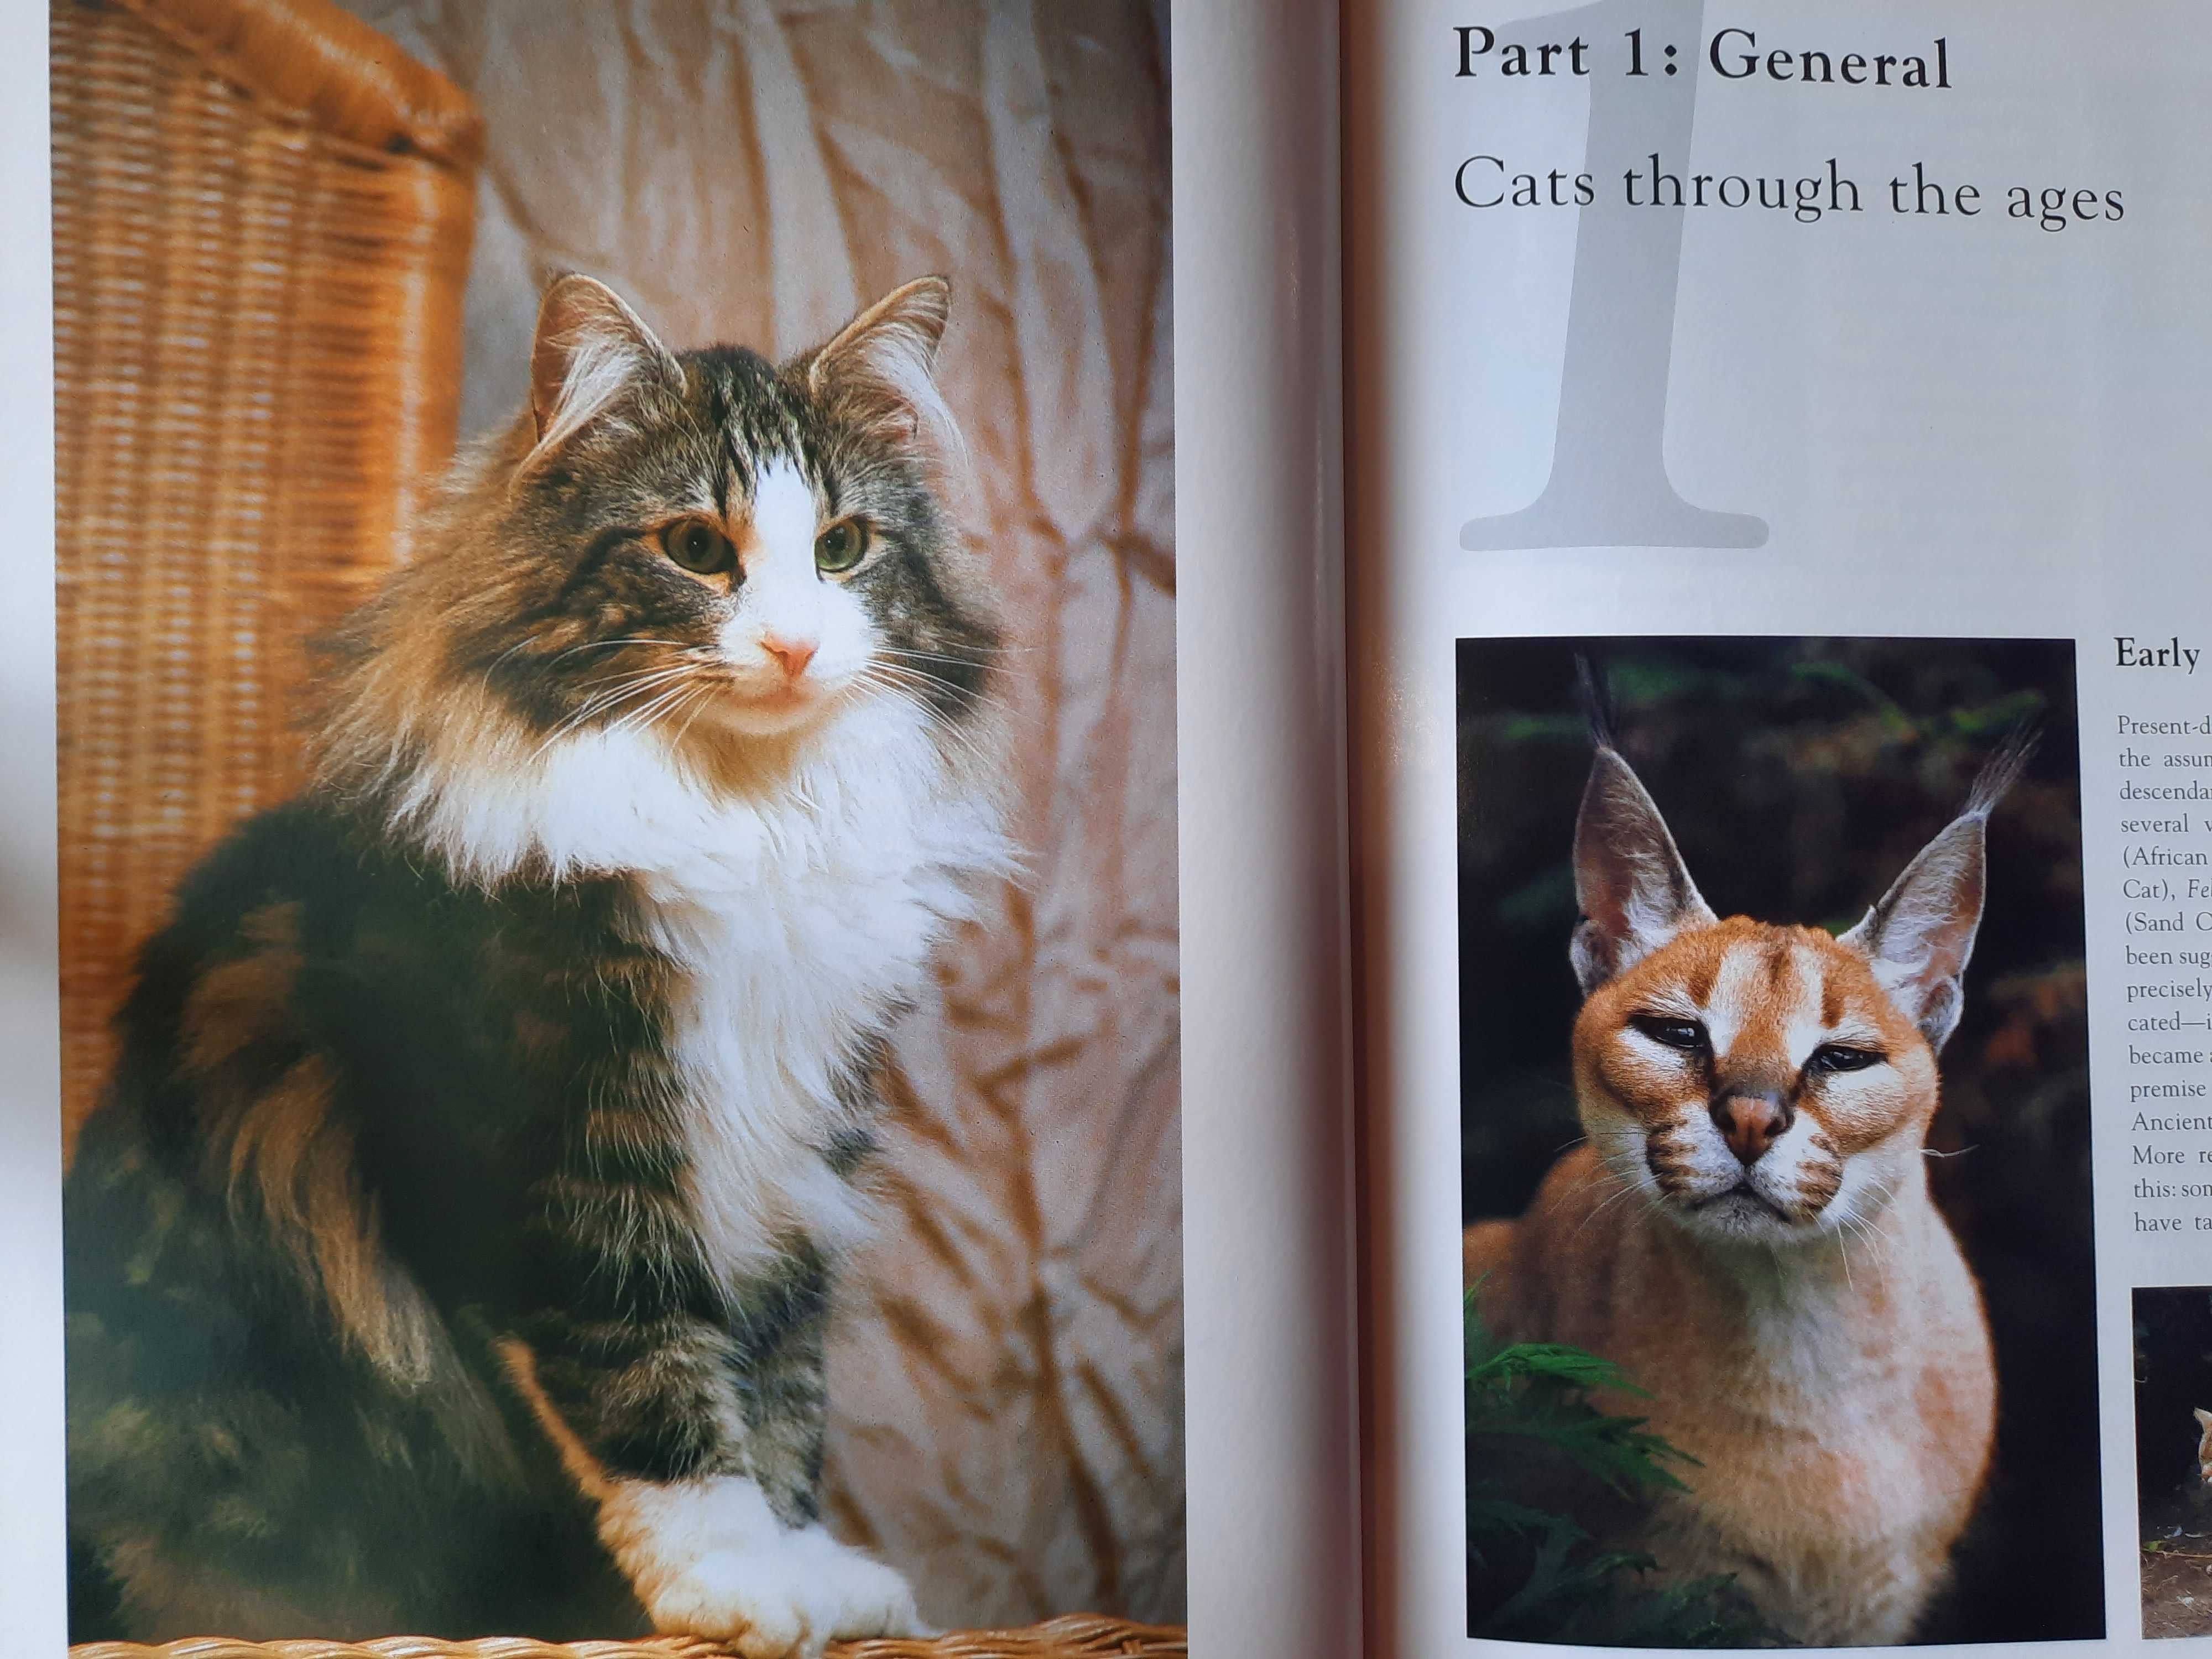 The complete encyclopedia of Cats